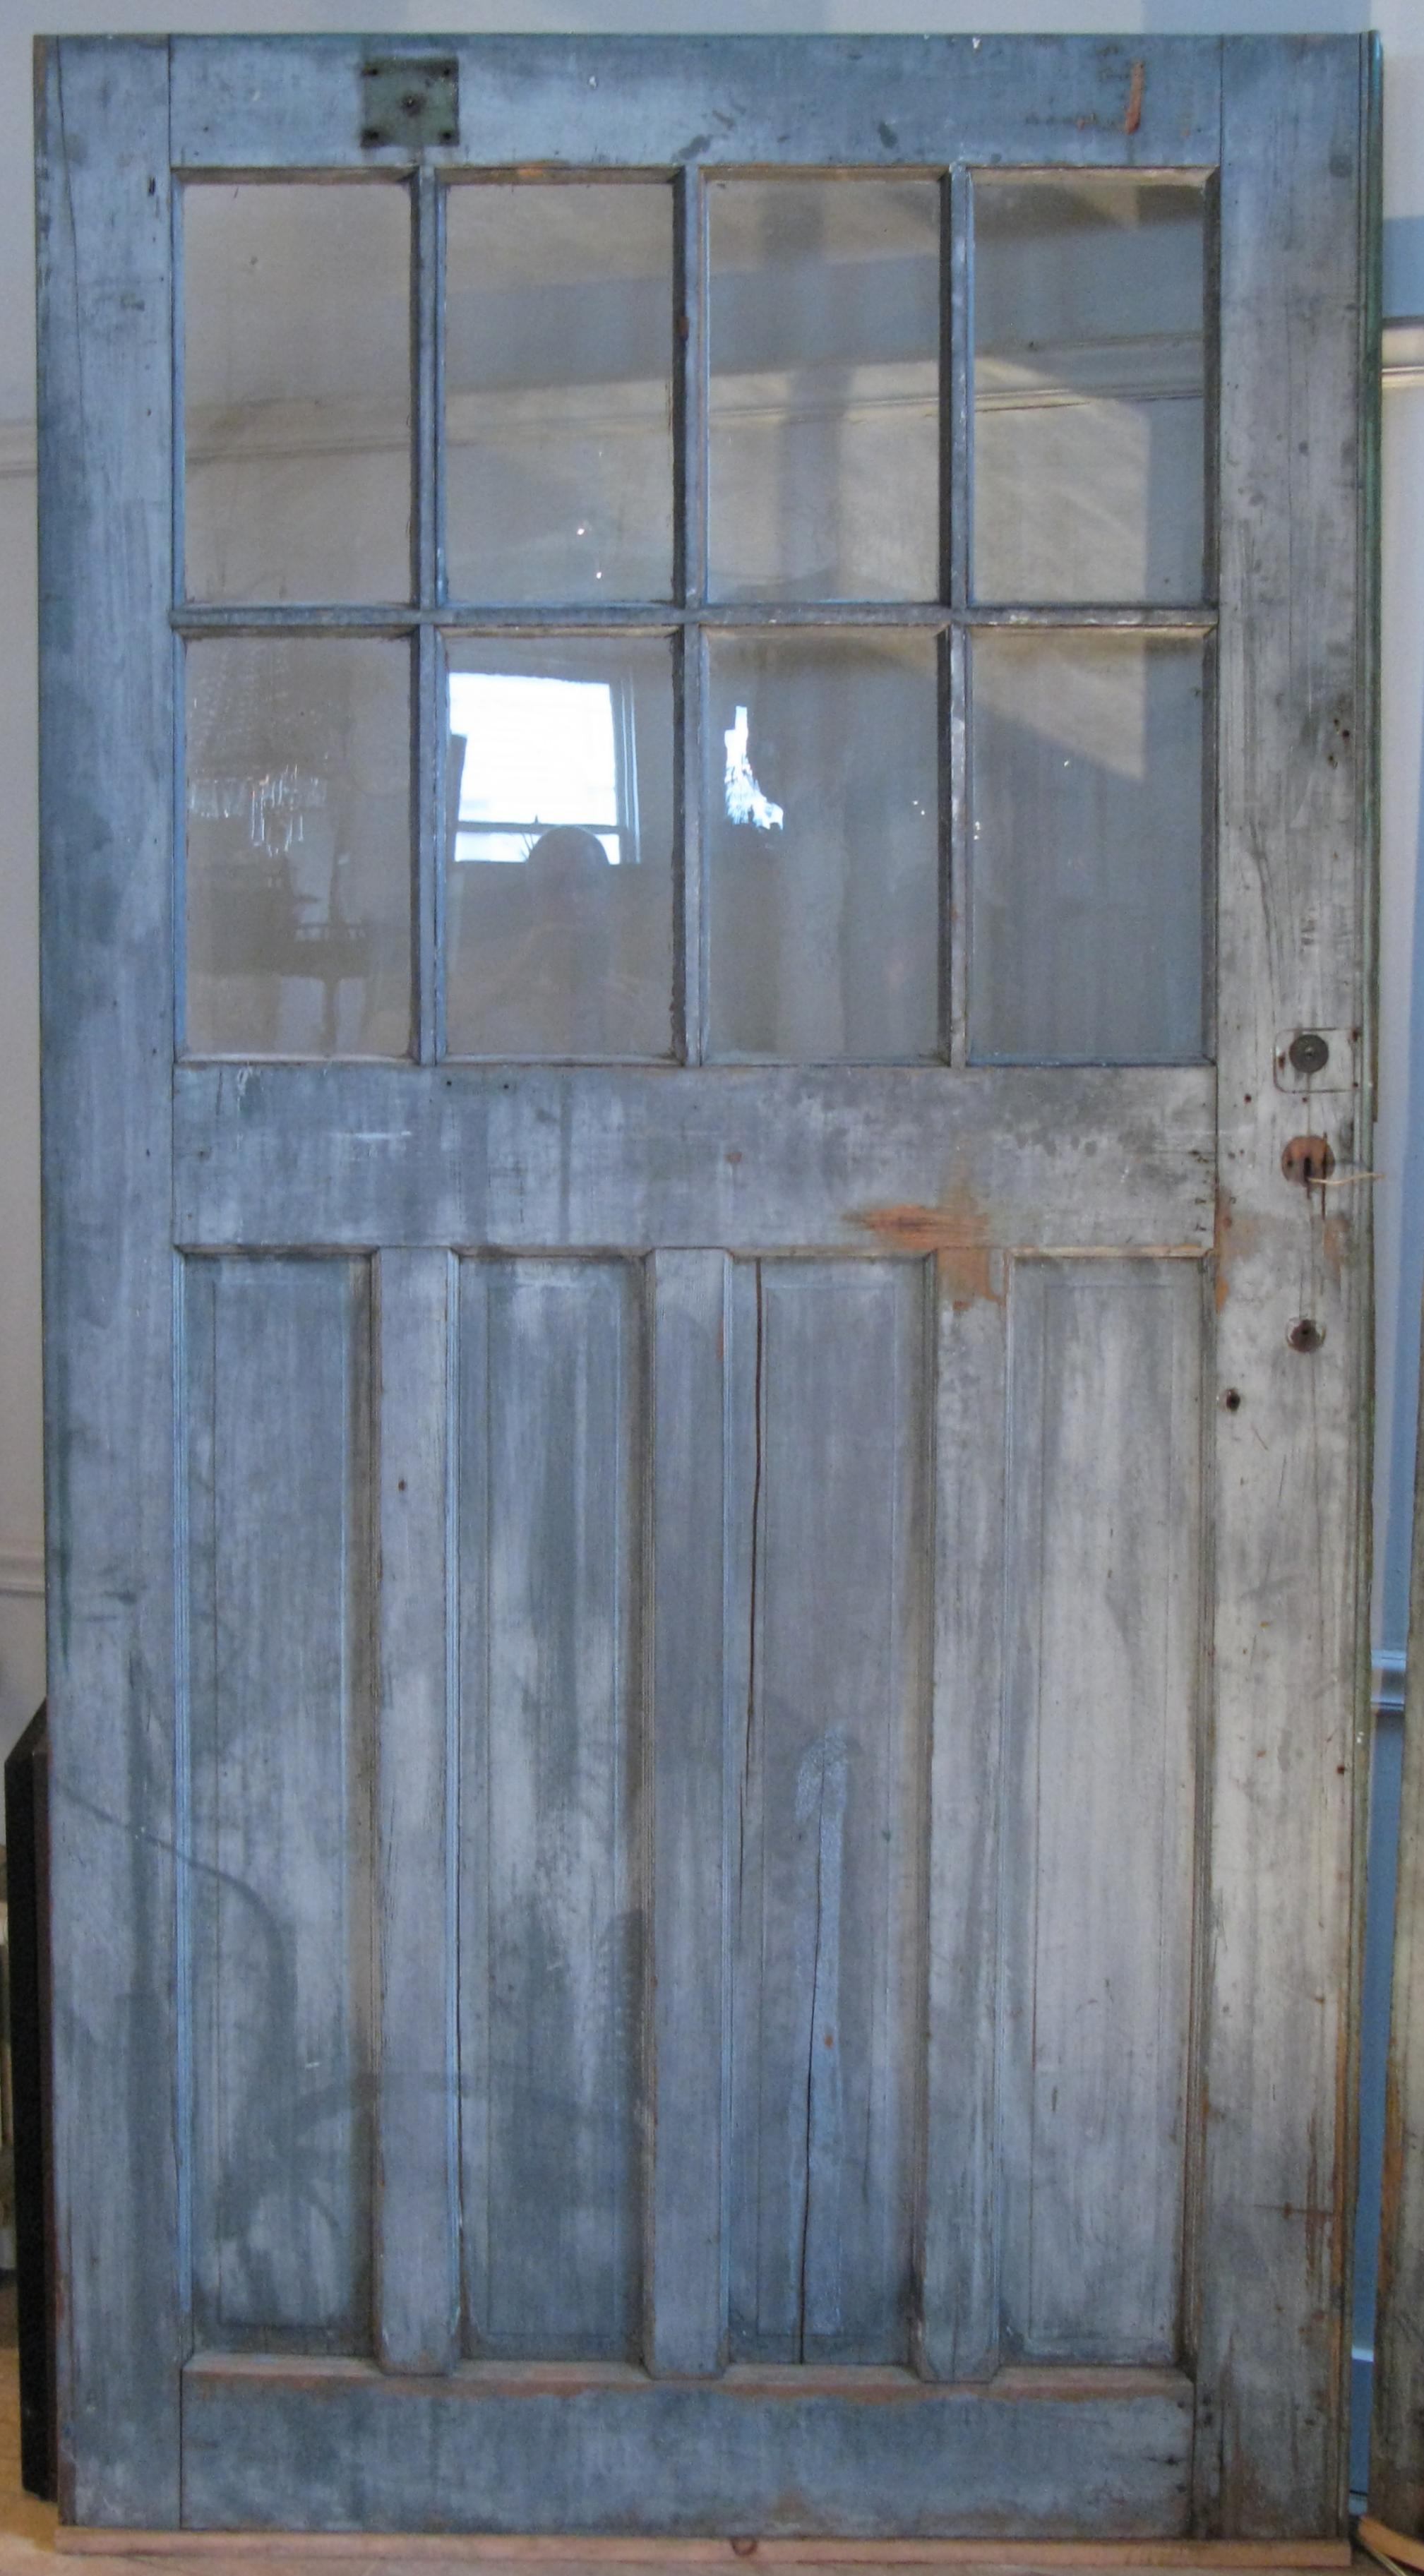 A large pair of beautiful early 20th century barn doors, each with 4 over 4 divided pane glass windows. One side is old blue/grey painted finish, and the other side is brick red. Very good condition and well made.

Each door is 48